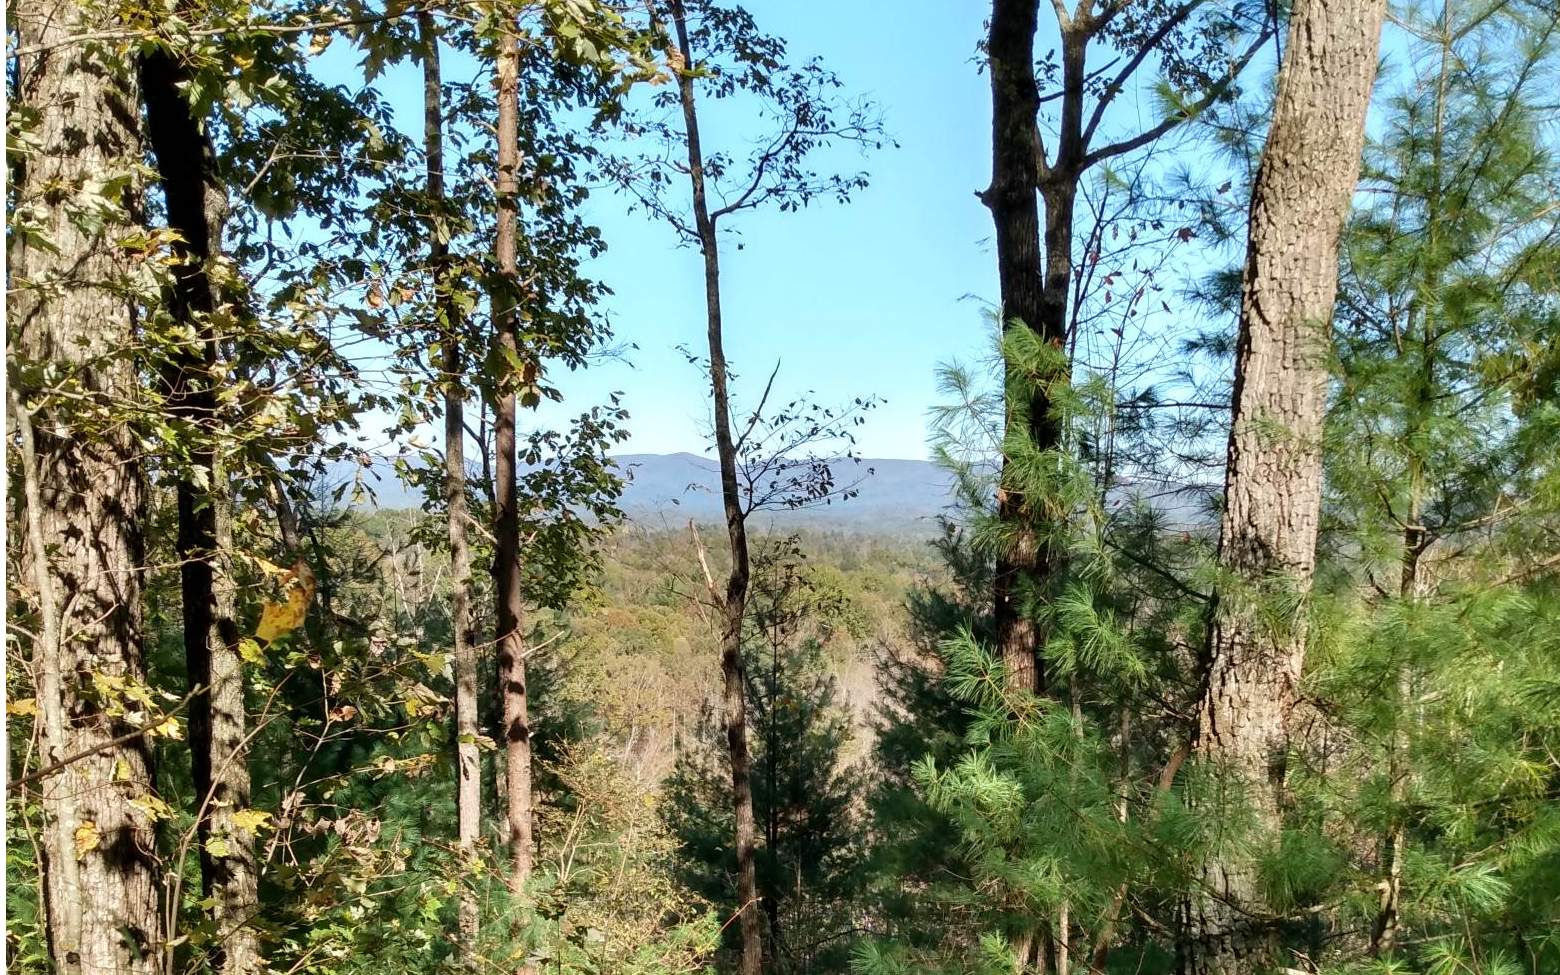 "Don't miss this opportunity to purchase a rare 2 acre UNRESTRICTED lot with NO HOA and breathtaking Cohutta Mountain views. This gorgeous parcel is the third highest lot on Pine Mountain, has excellent topography for home sites, power easily available at front of property, an active perc test and septic permit on file, and will have year round long range views after mimal clearing for a septic field. Get this before it's gone and build your dream cabin, tiny home, geodome, manufactured home, or whatever else your heart desires (Gilmer county requires all habitable structures to be a minimum of 500sf ). Some owner financing may be considered with an acceptable offer. Call agent for more details.